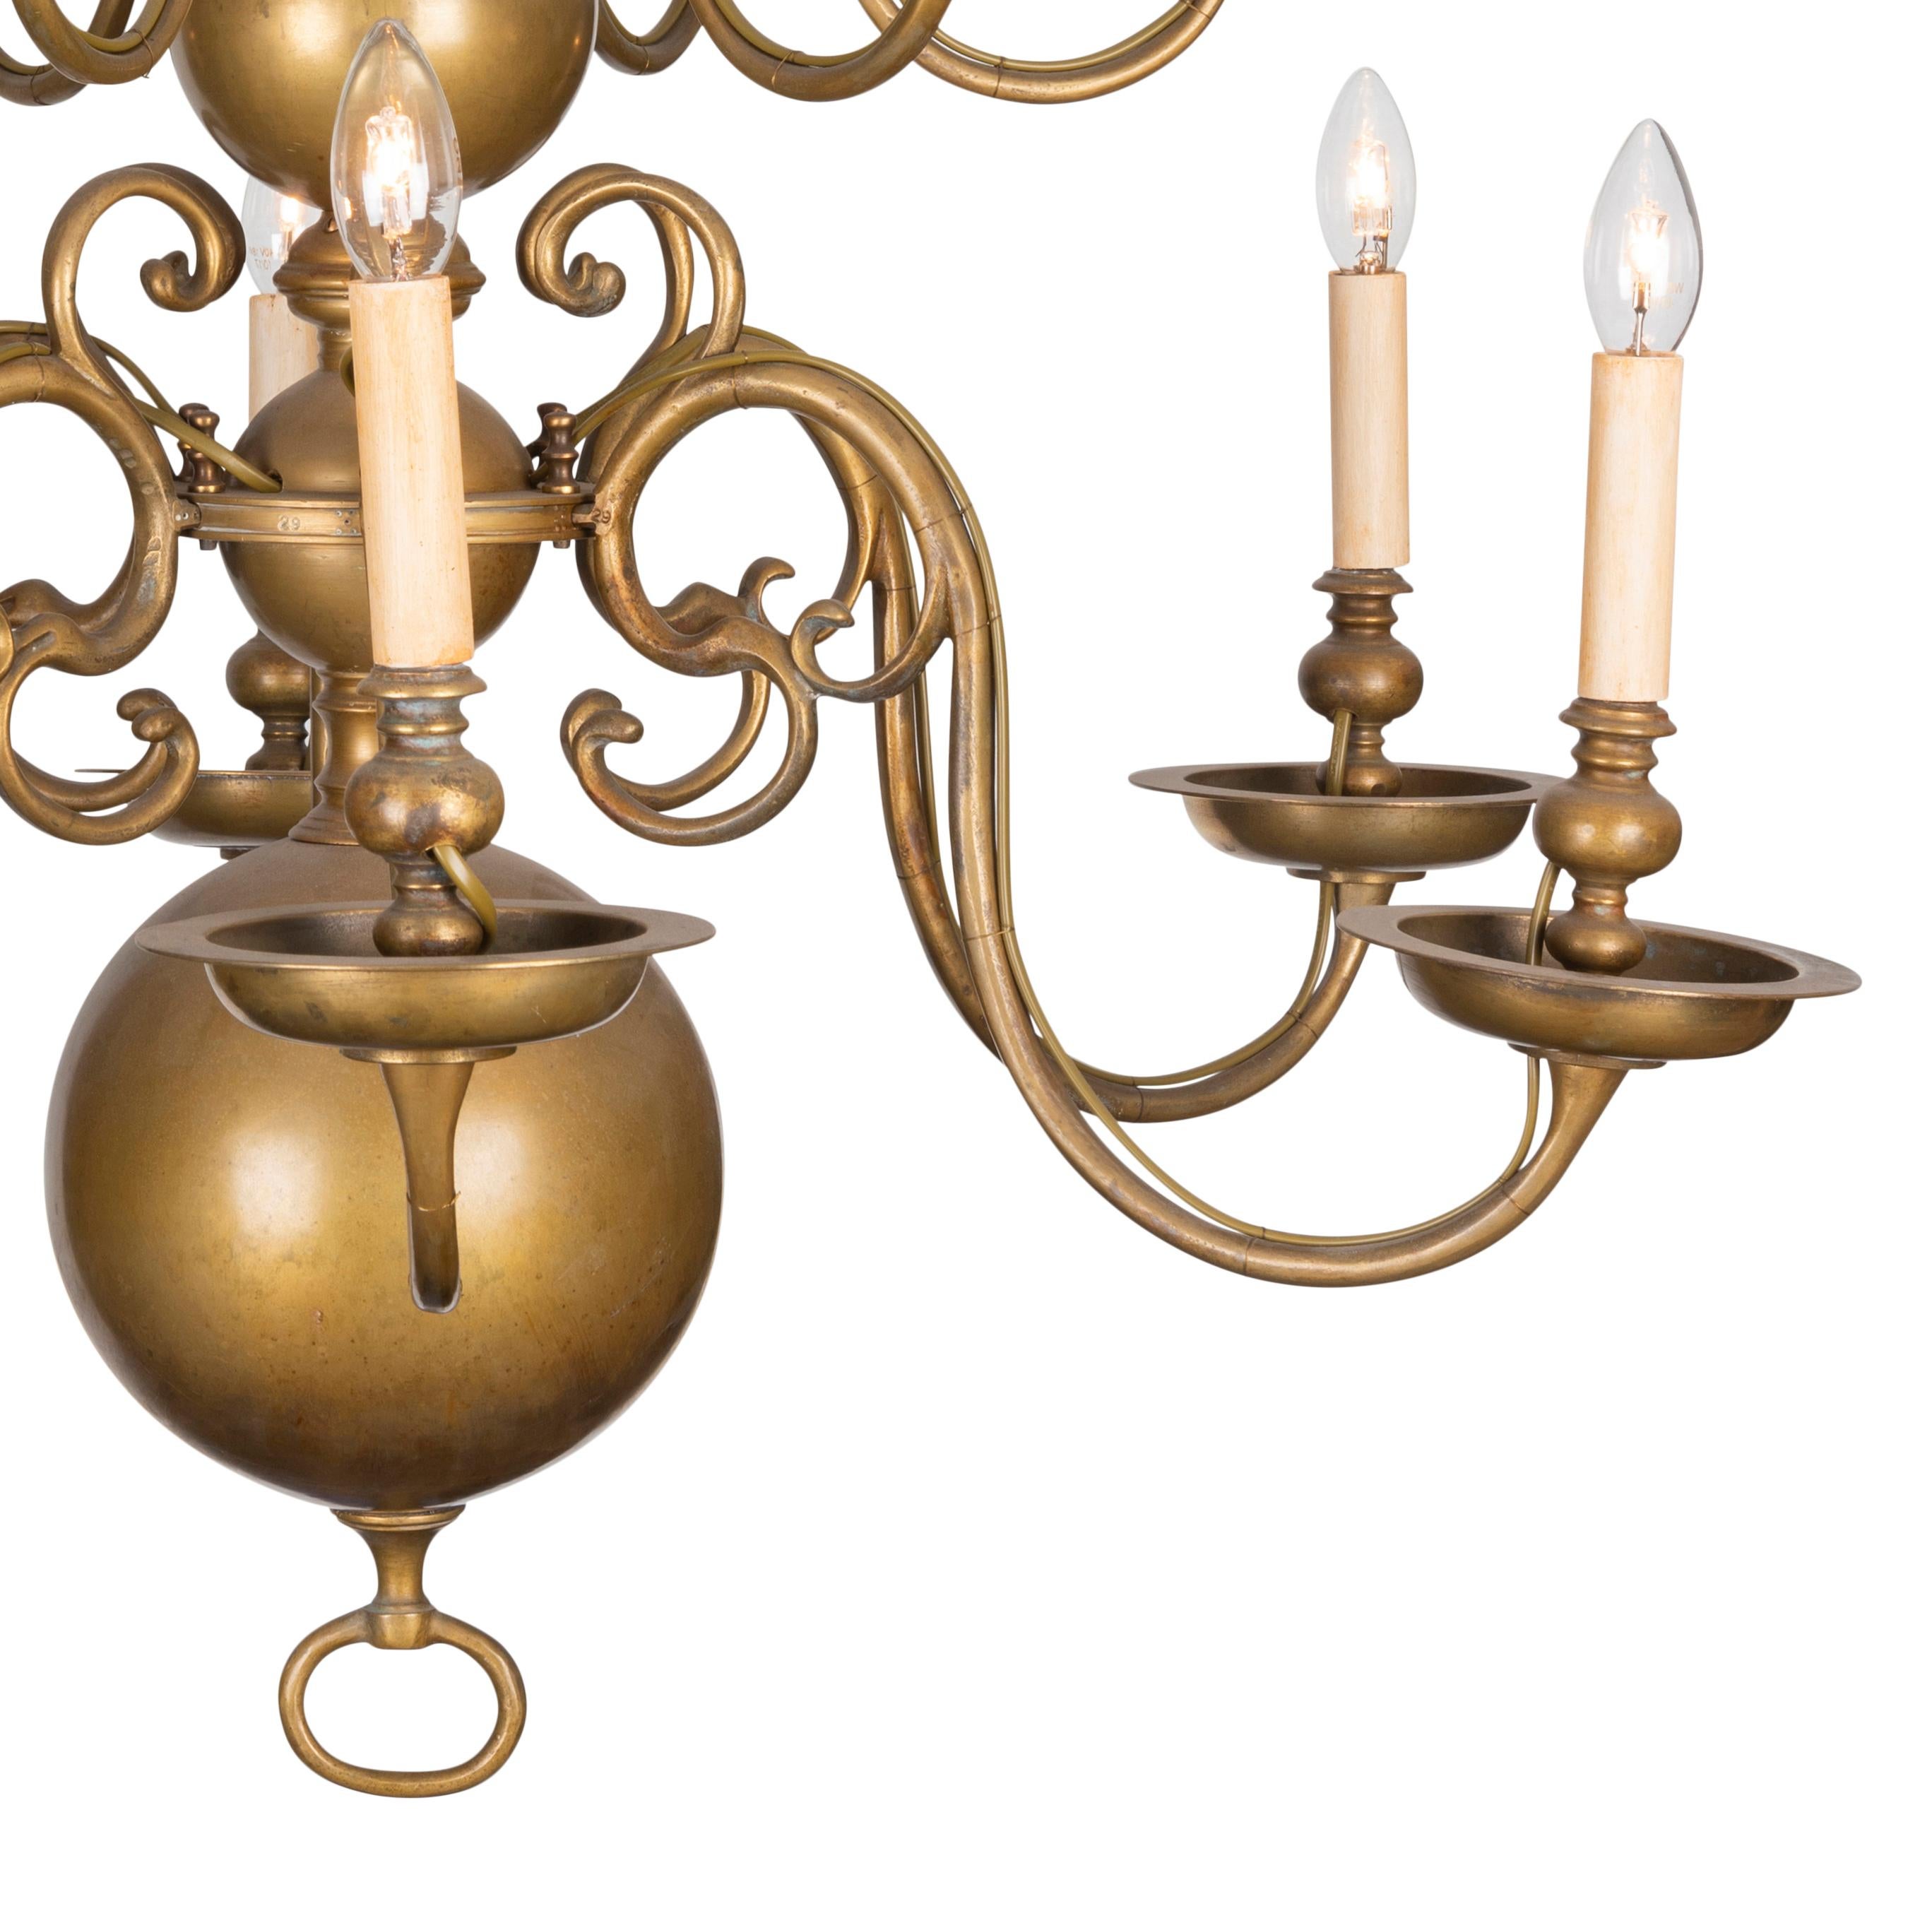 The graduated globular baluster stem with two graduated tiers, each tier with six scroll arms to drip pans and bud nozzle with faux candle lights to ring finial.
Electrified.